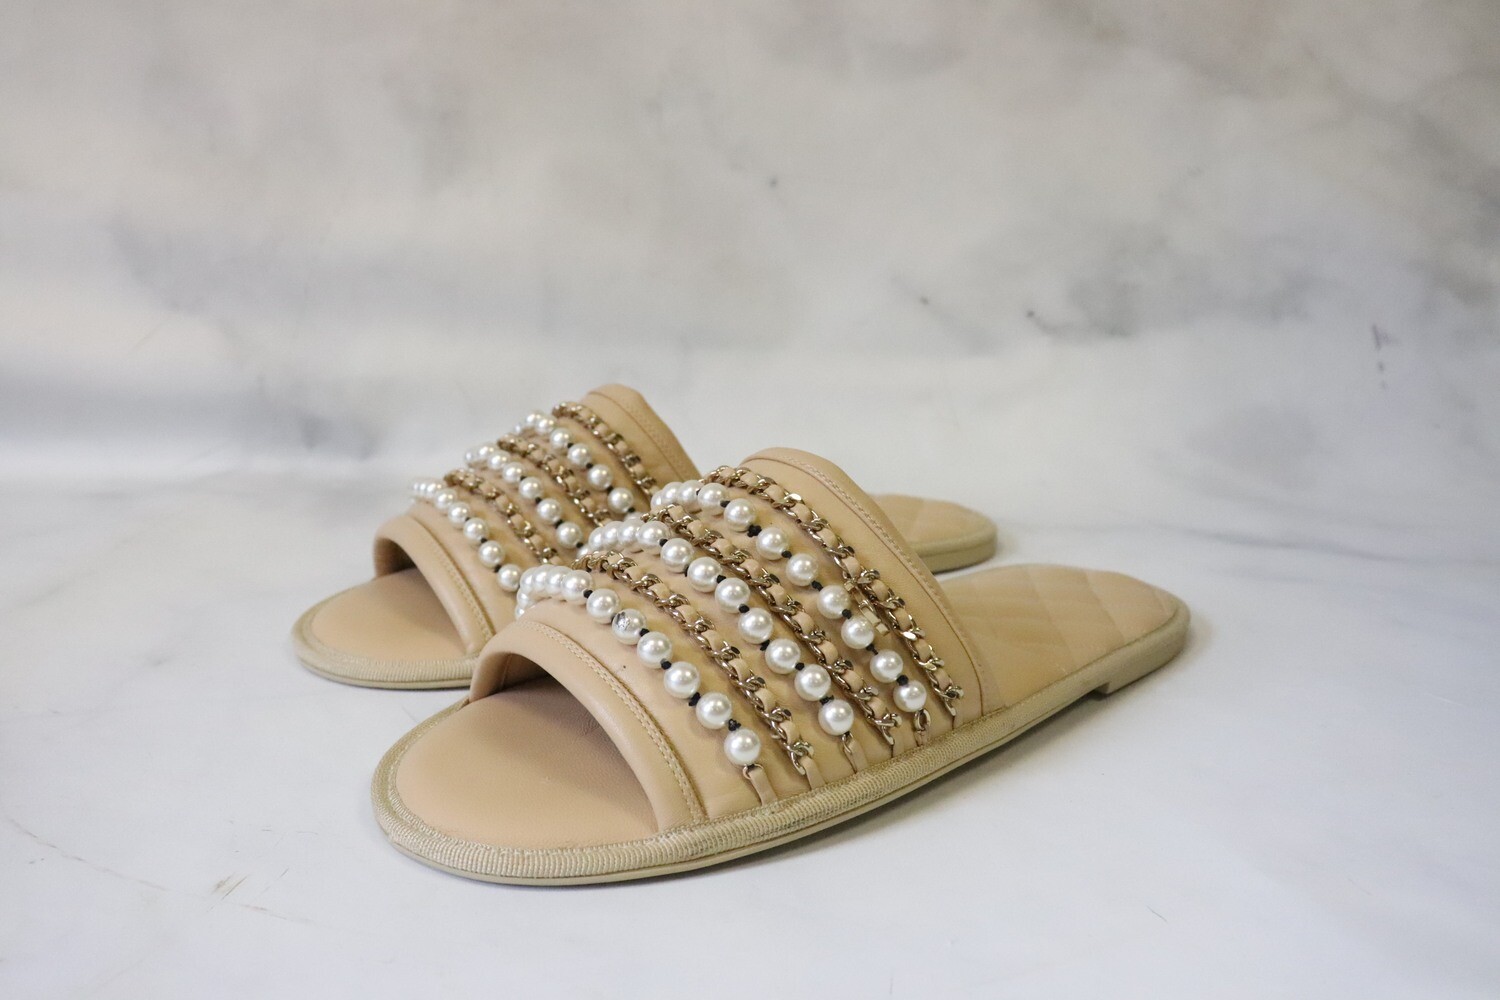 Chanel Slides Pearl Beige Size Medium, Preowned in Box